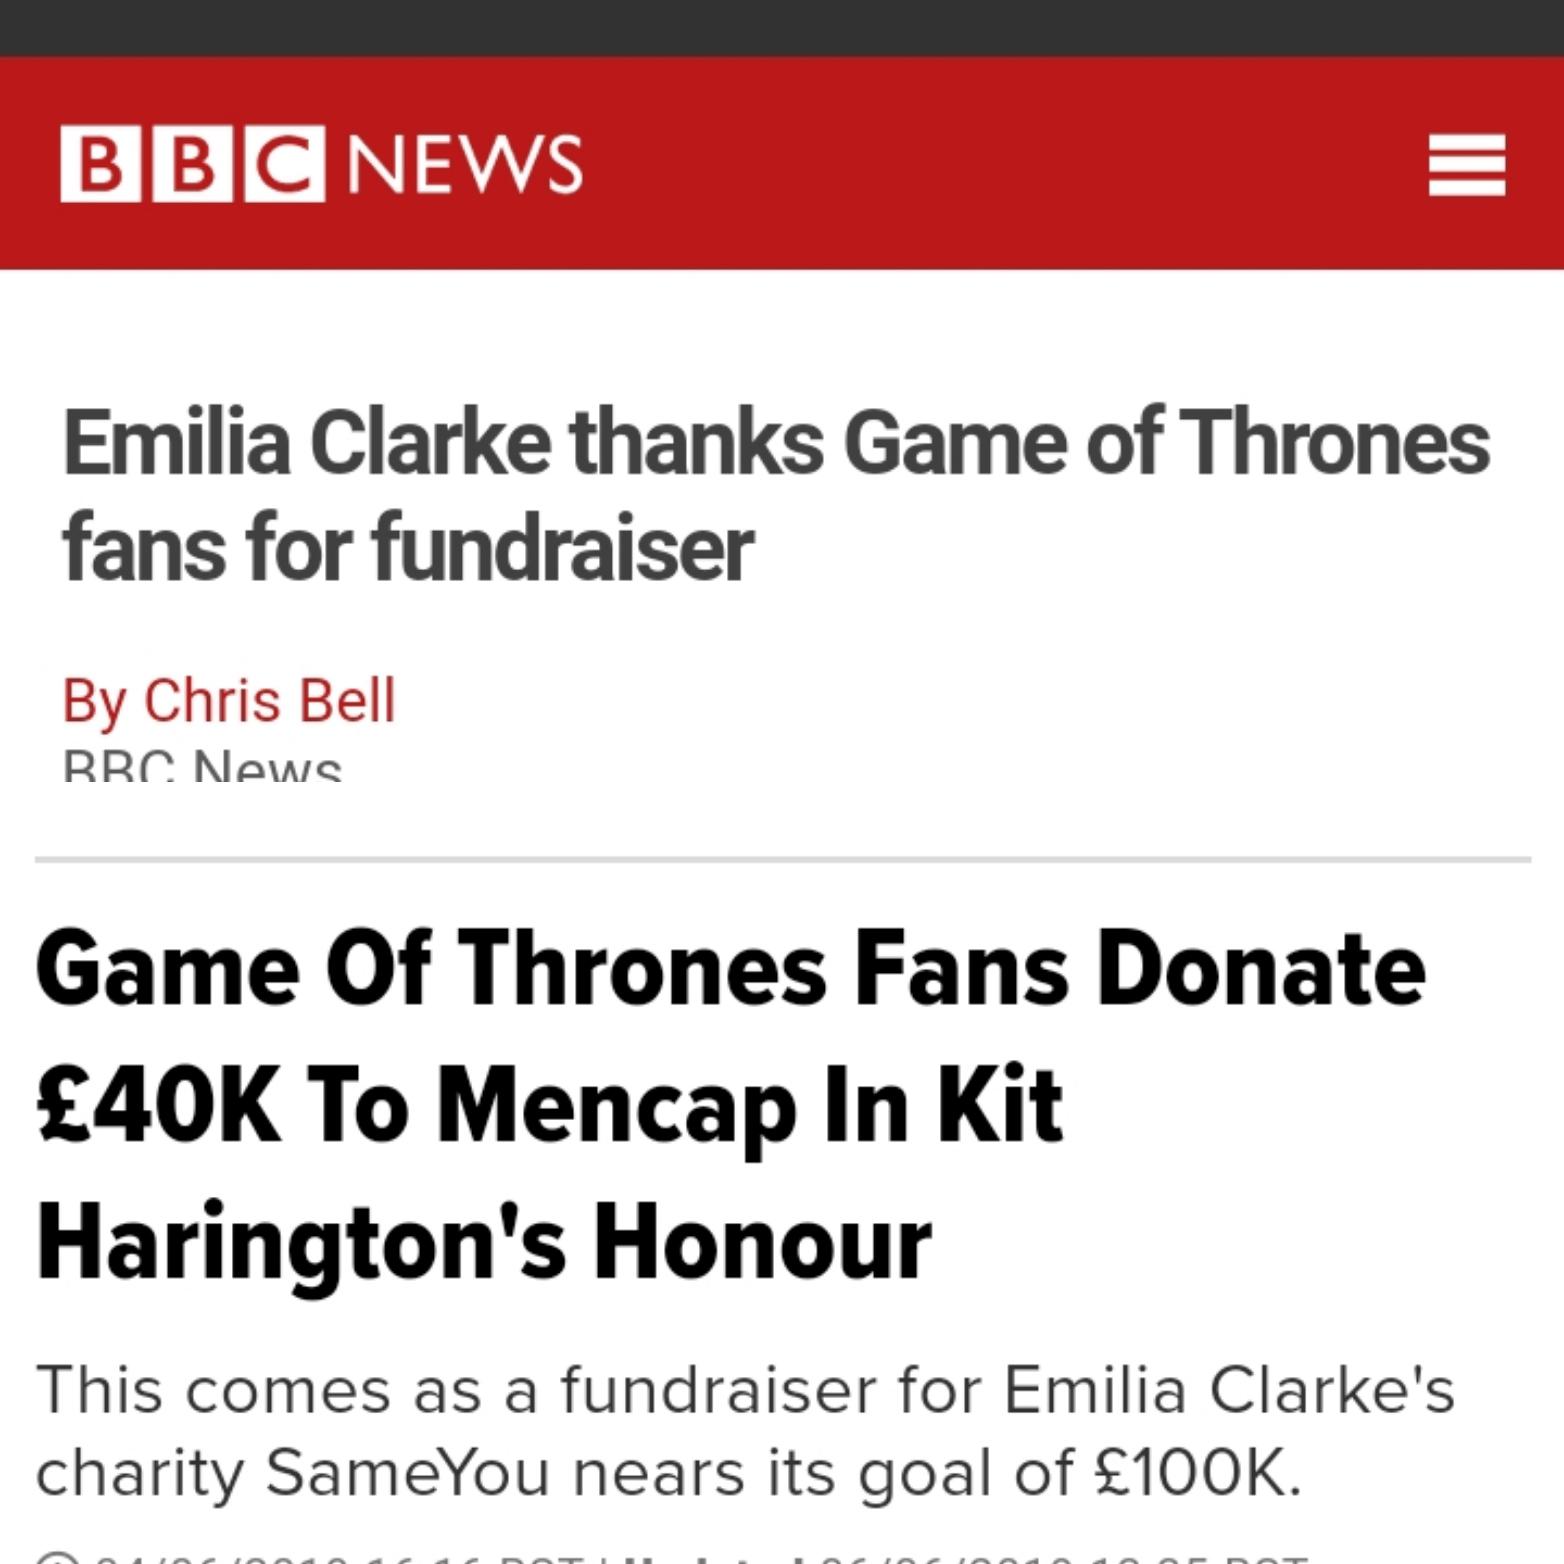 game-of-thrones game-of-thrones-memes game-of-thrones text: NEWS Emilia Clarke thanks Game of Thrones fans for fundraiser By Chris Bell Game Of Thrones Fans Donate E40K To Mencap In Kit Harington's Honour This comes as a fundraiser for Emilia Clarke's charity SameYou nears its goal of EIOOK. 